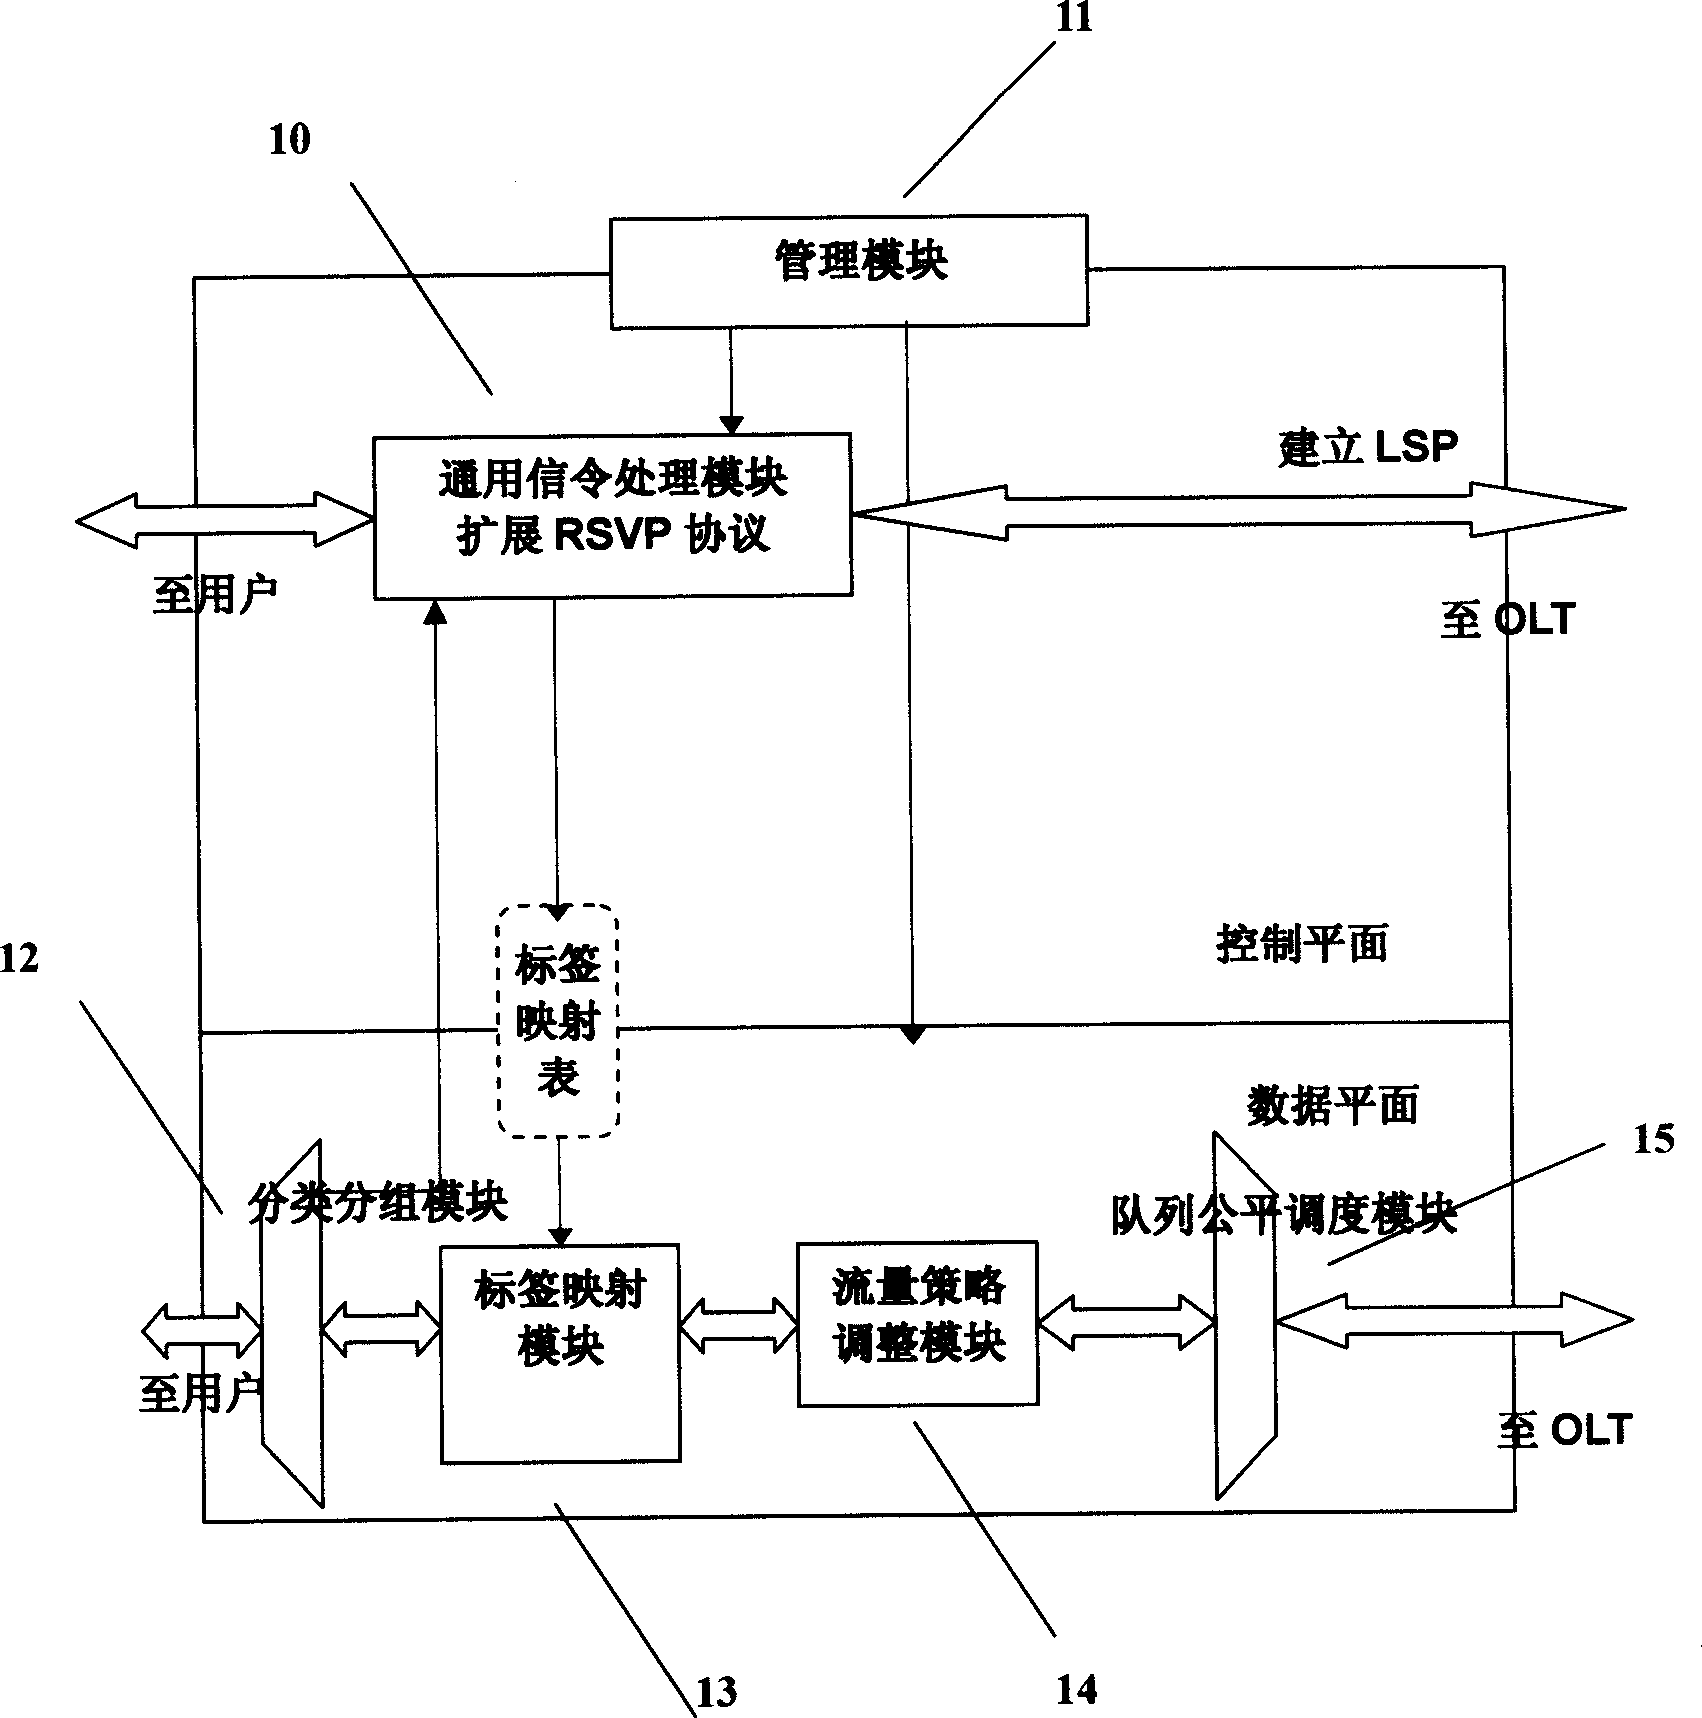 Passive optical network system based on generalized multiprotocol label switching (GMPLS) protocol